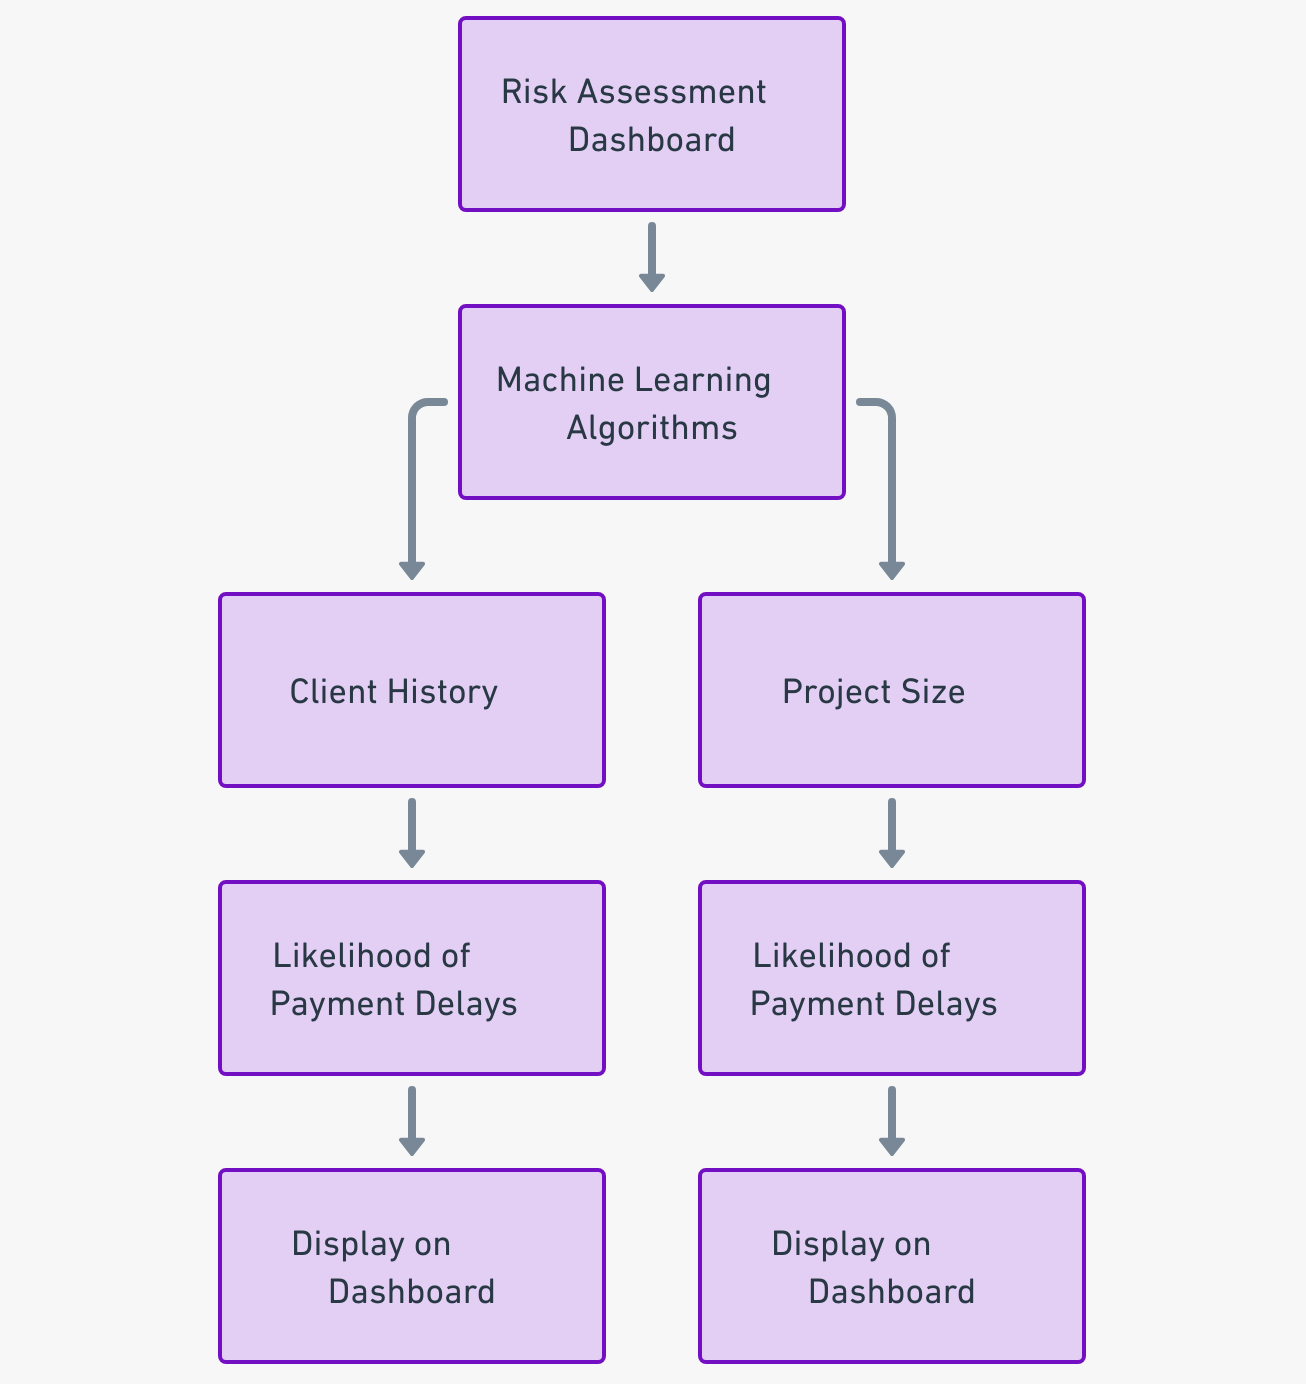 A risk assessment dashboard, possibly utilizing machine learning algorithms, can display the likelihood of payment delays based on various parameters like client history and project size.